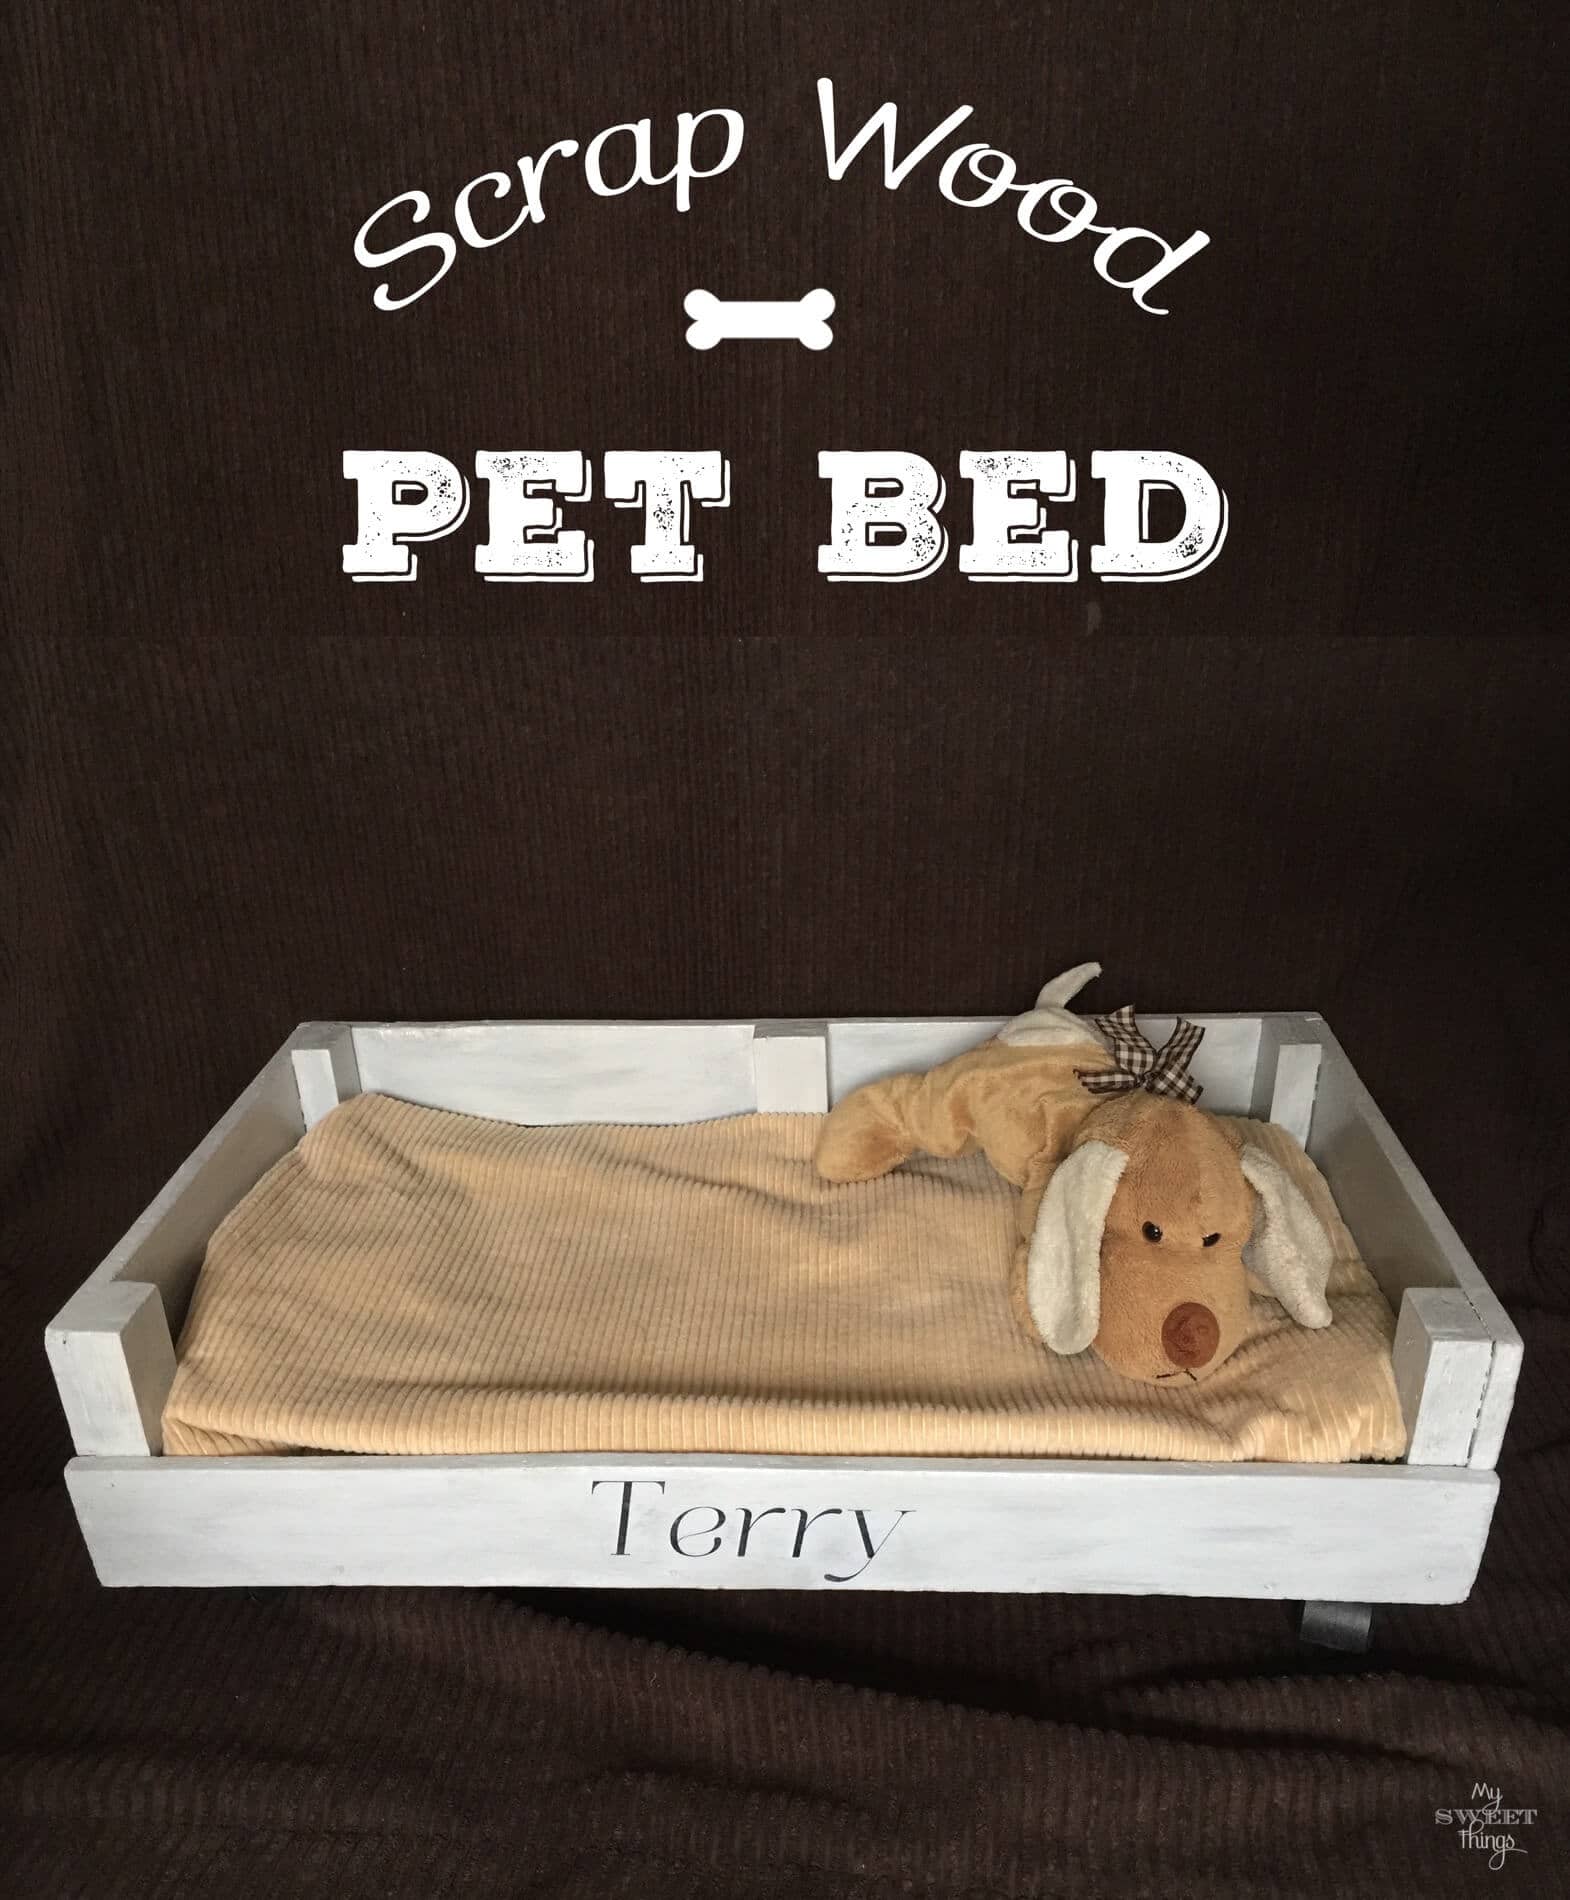 How to make a pet bed out of scrap wood